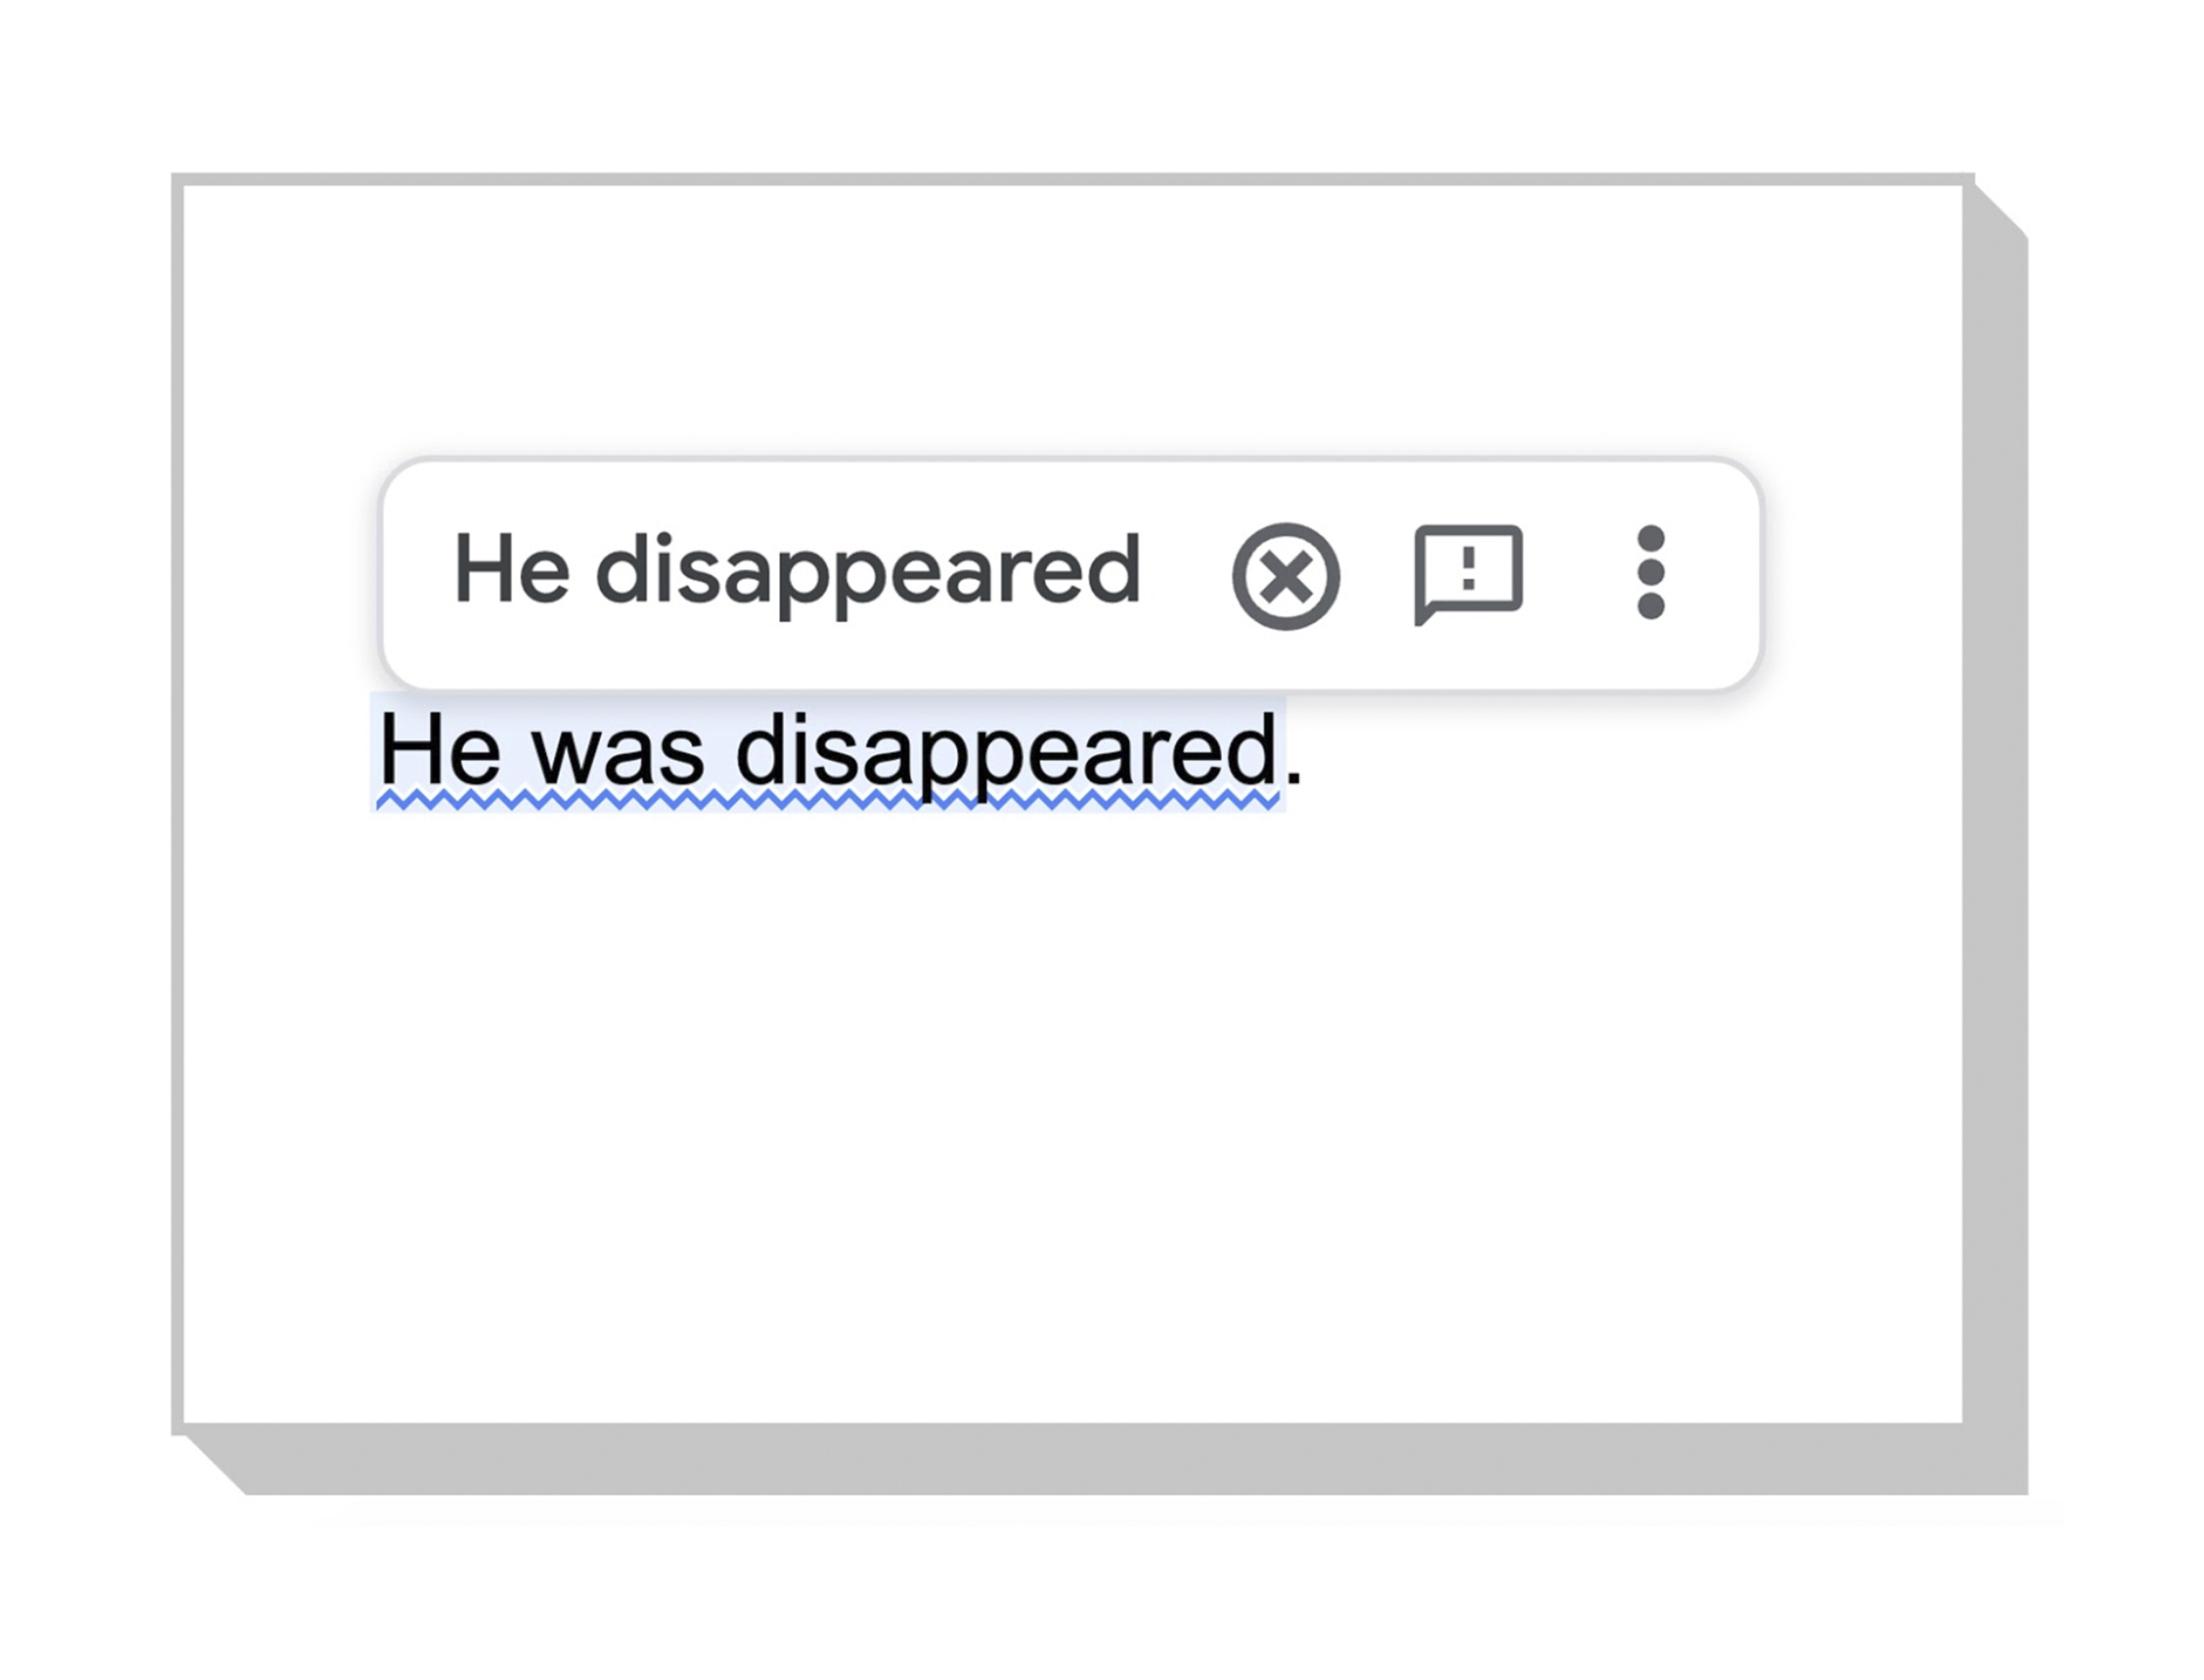 Image with text: Example of autocorrect. "He was disappeared" is changed to "he disappeared"